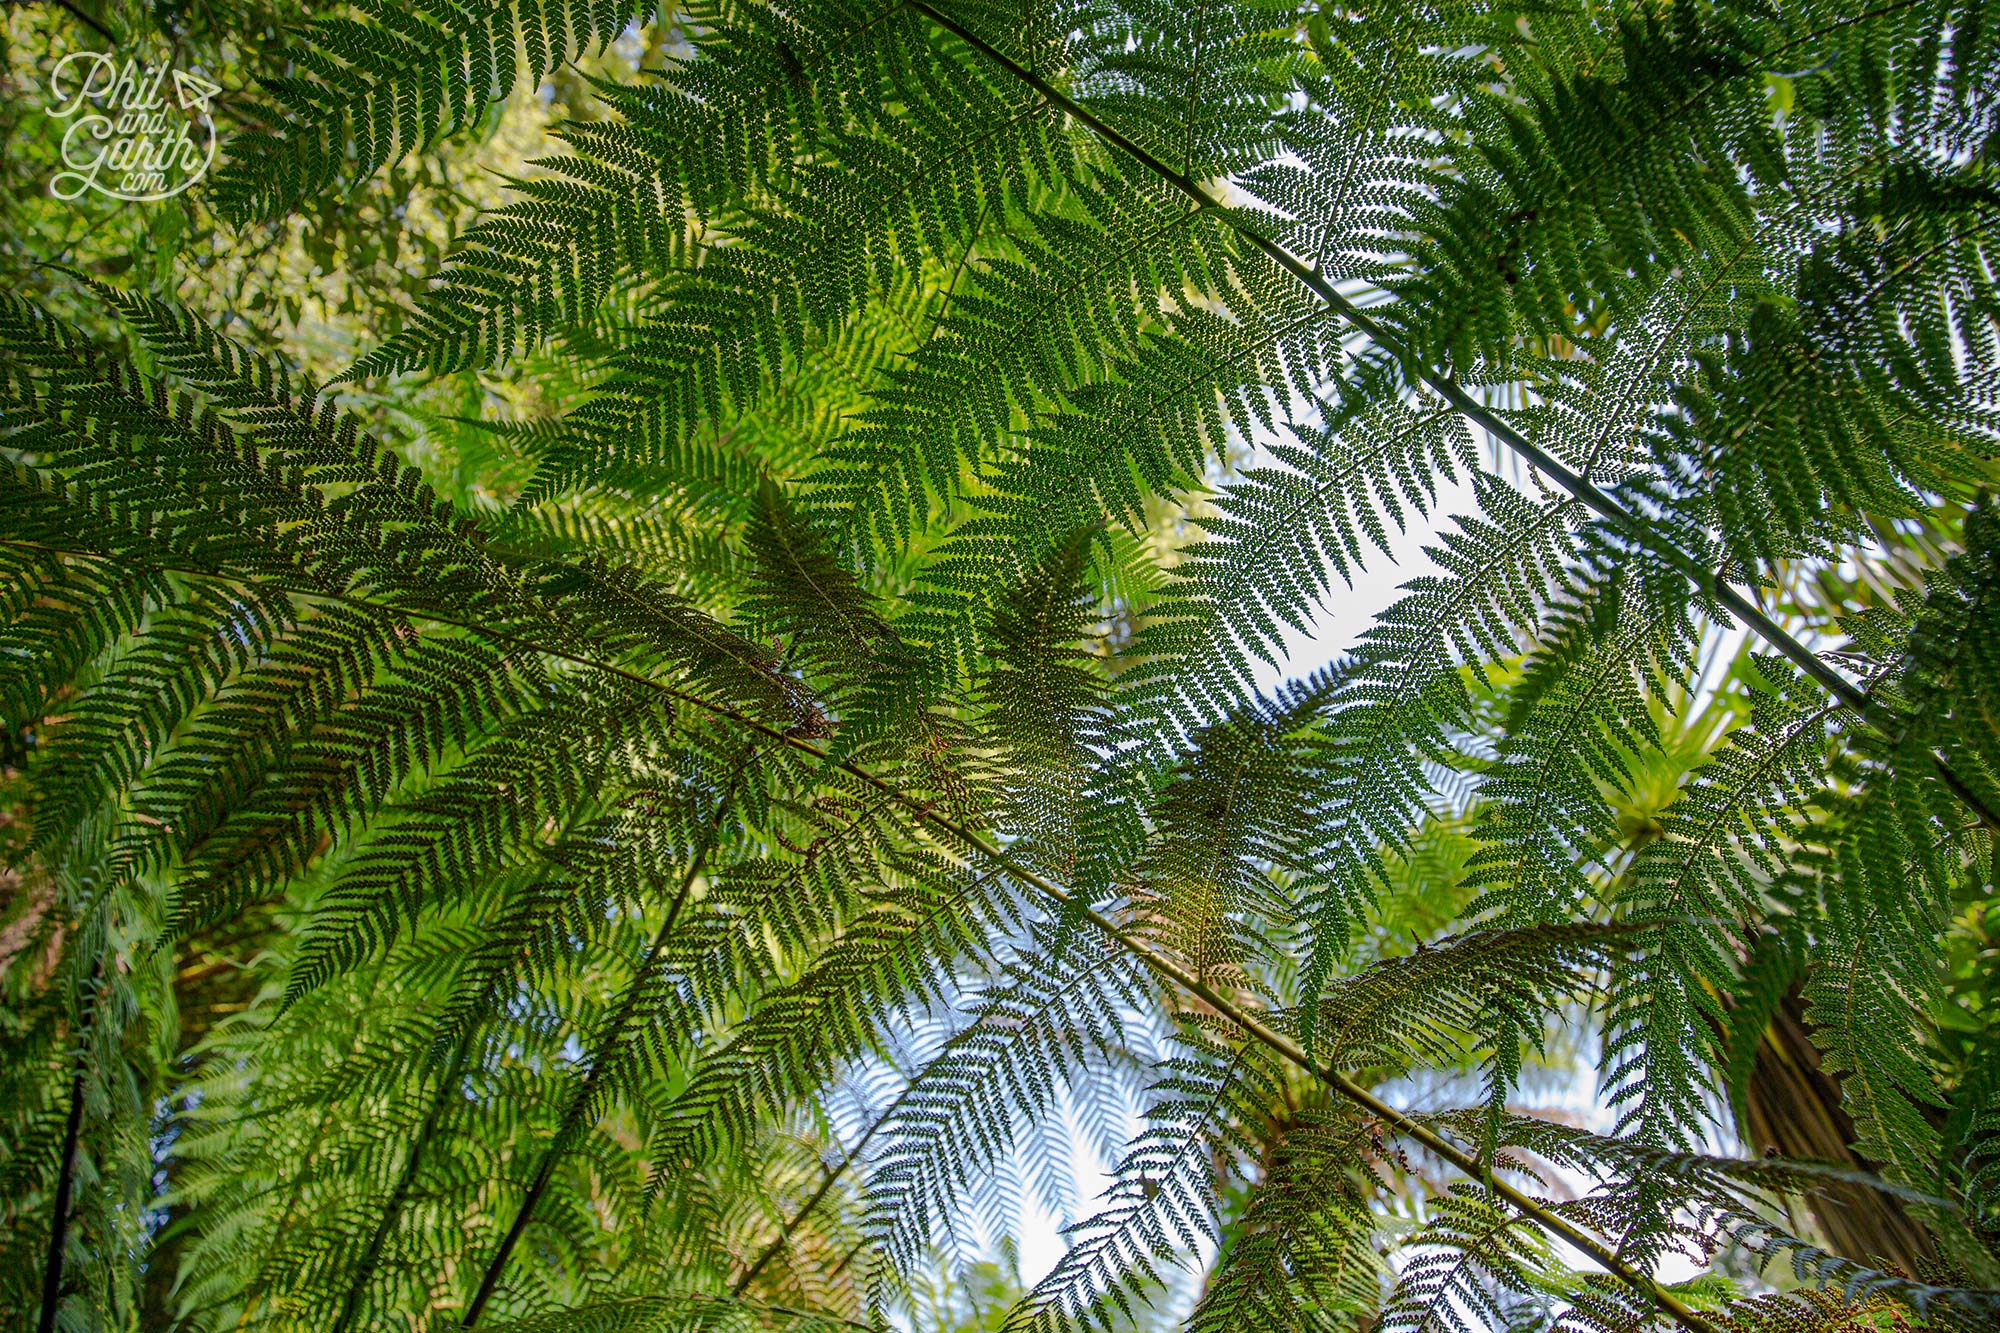 Parts of the New Zealand Garden have a canopy of tree ferns